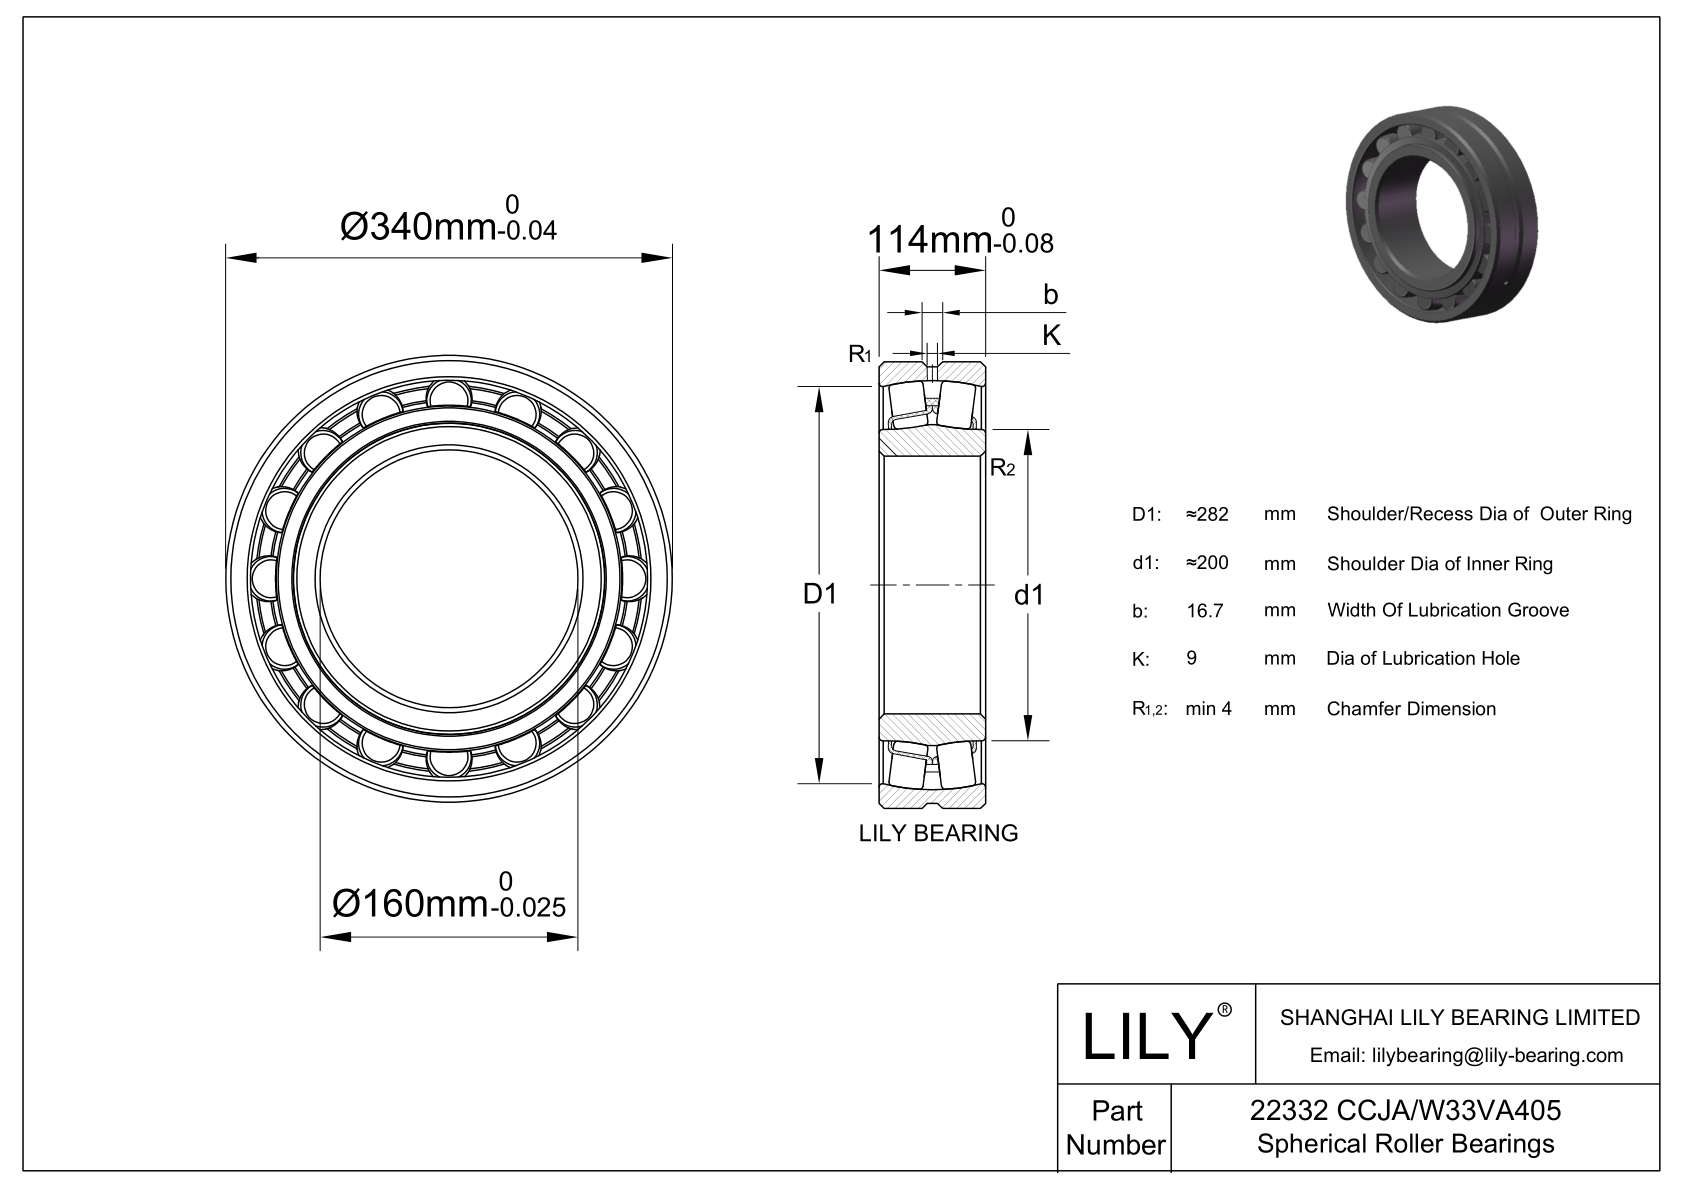 22332 CCJA/W33VA405 Double Row Spherical Roller Bearing cad drawing